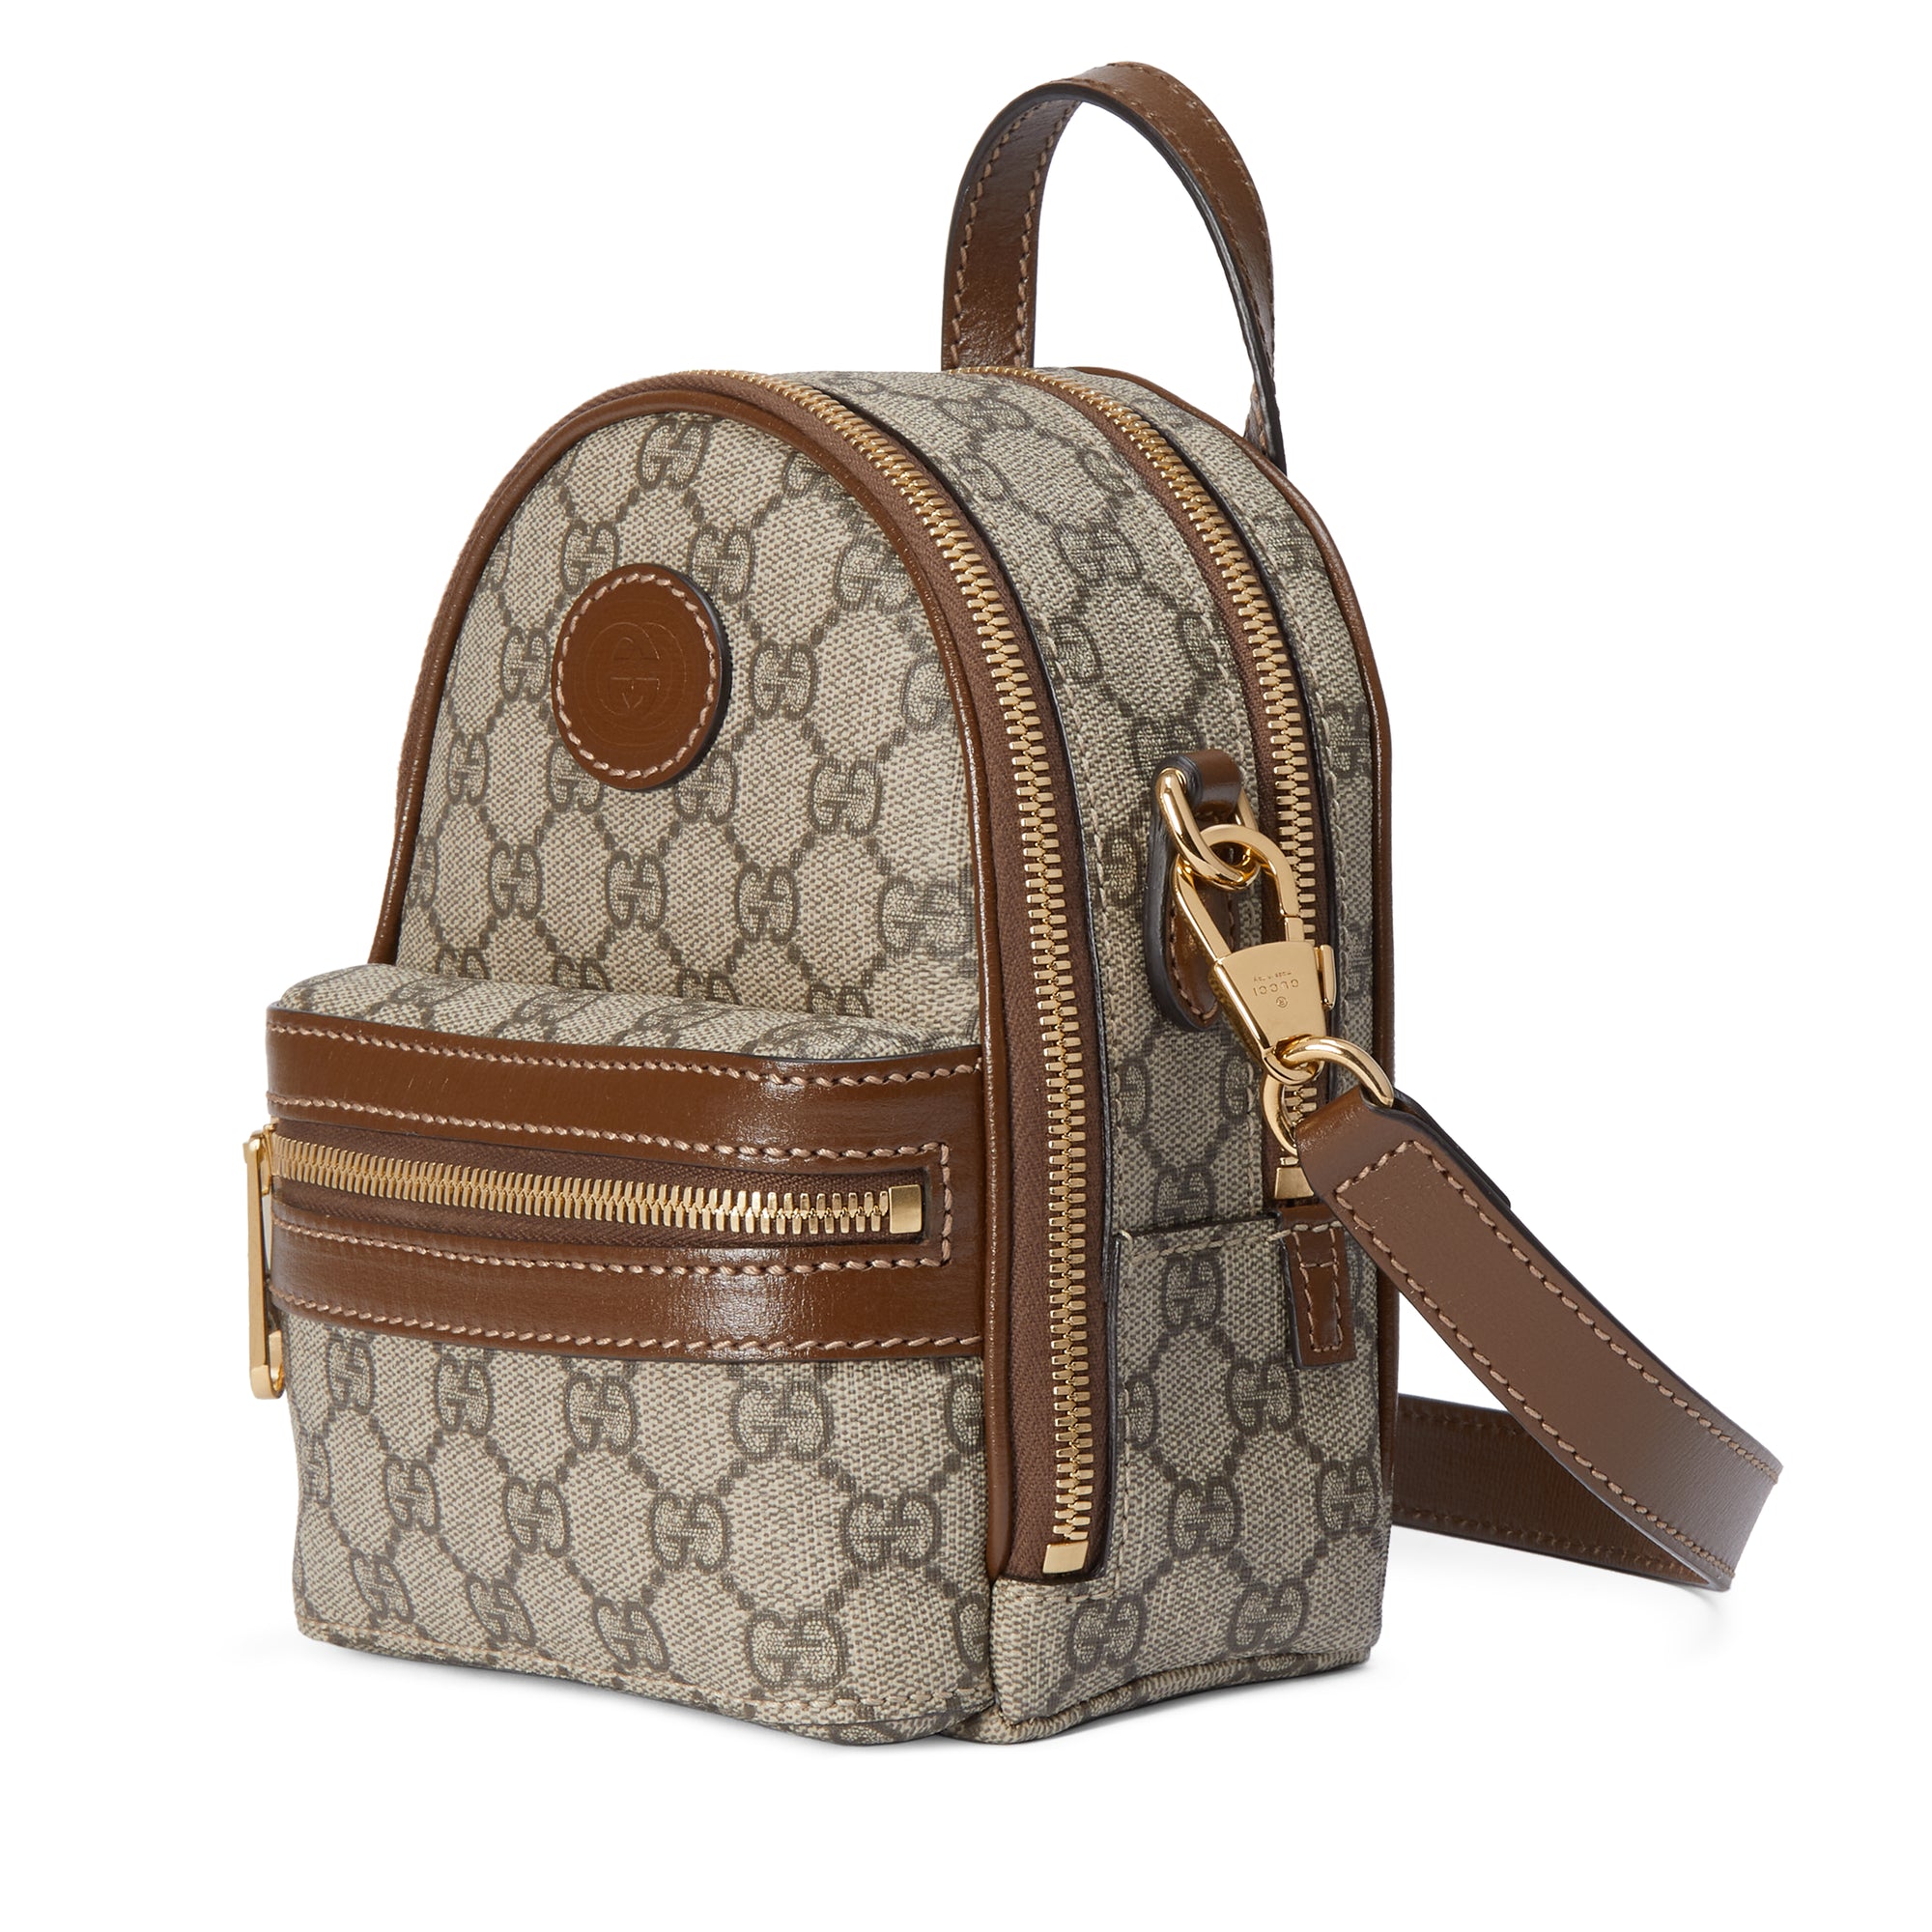 Mini bag with Interlocking G in GG supreme and brown leather